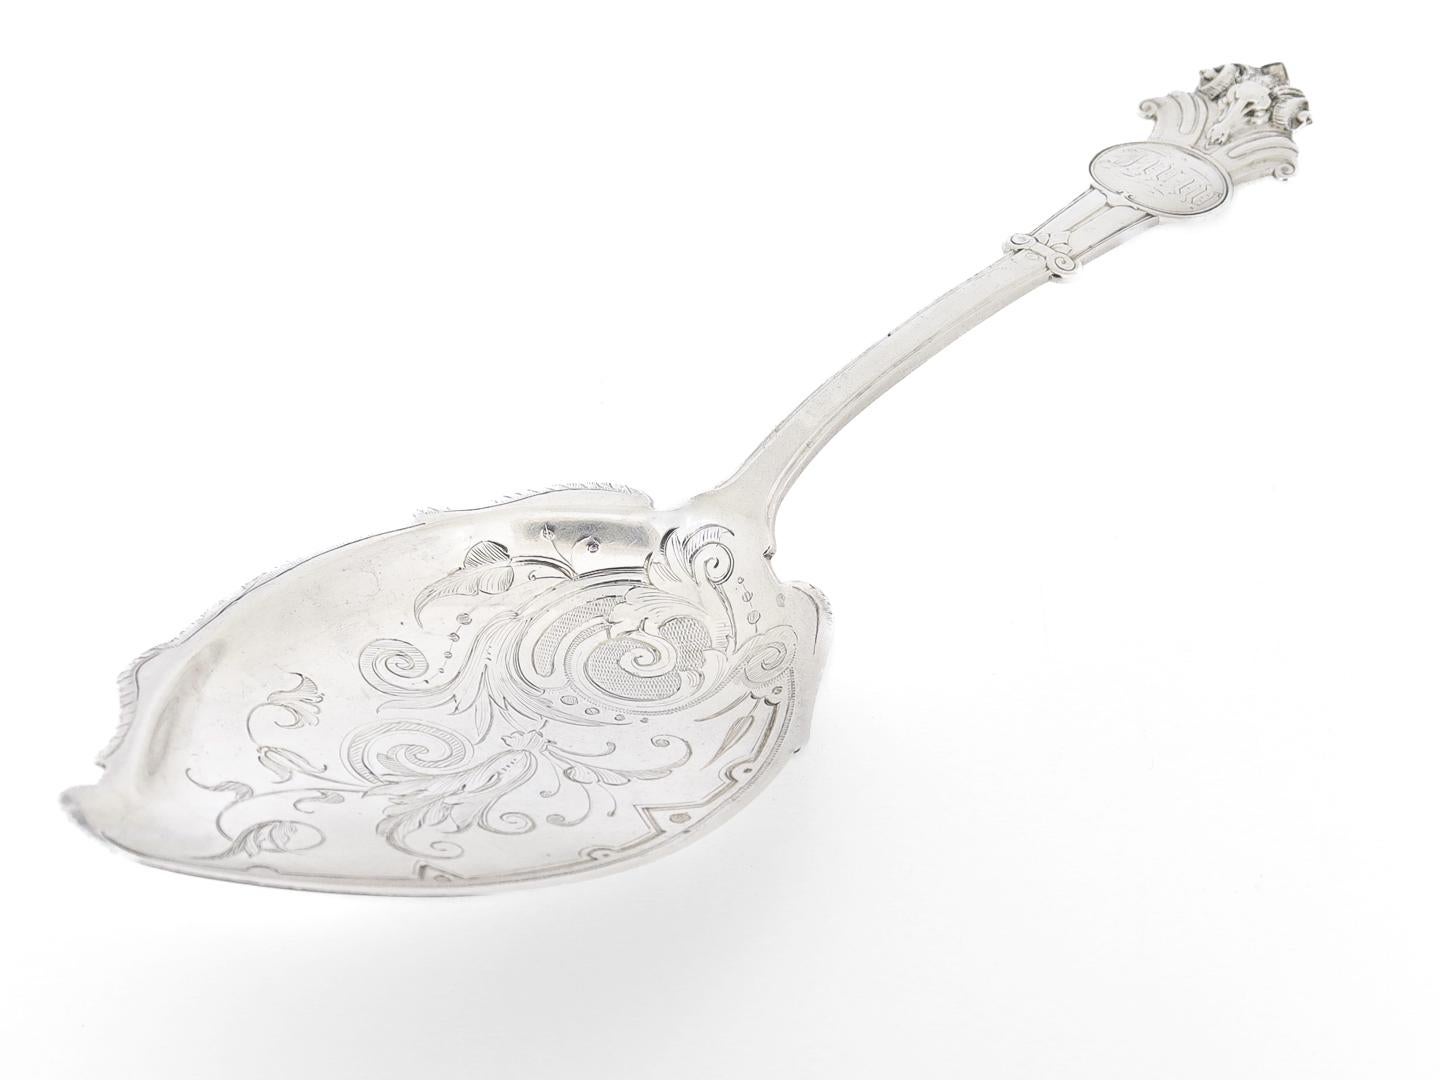 A fine antique silver ice cream slice or server.

Made by by John Wendt and retailed by J.E. Caldwell of Philadelphia, Pennsylvania.

With brite cut floral decoration to the bowl and a ram's head to the handle.

Monogrammed just beneath the ram's